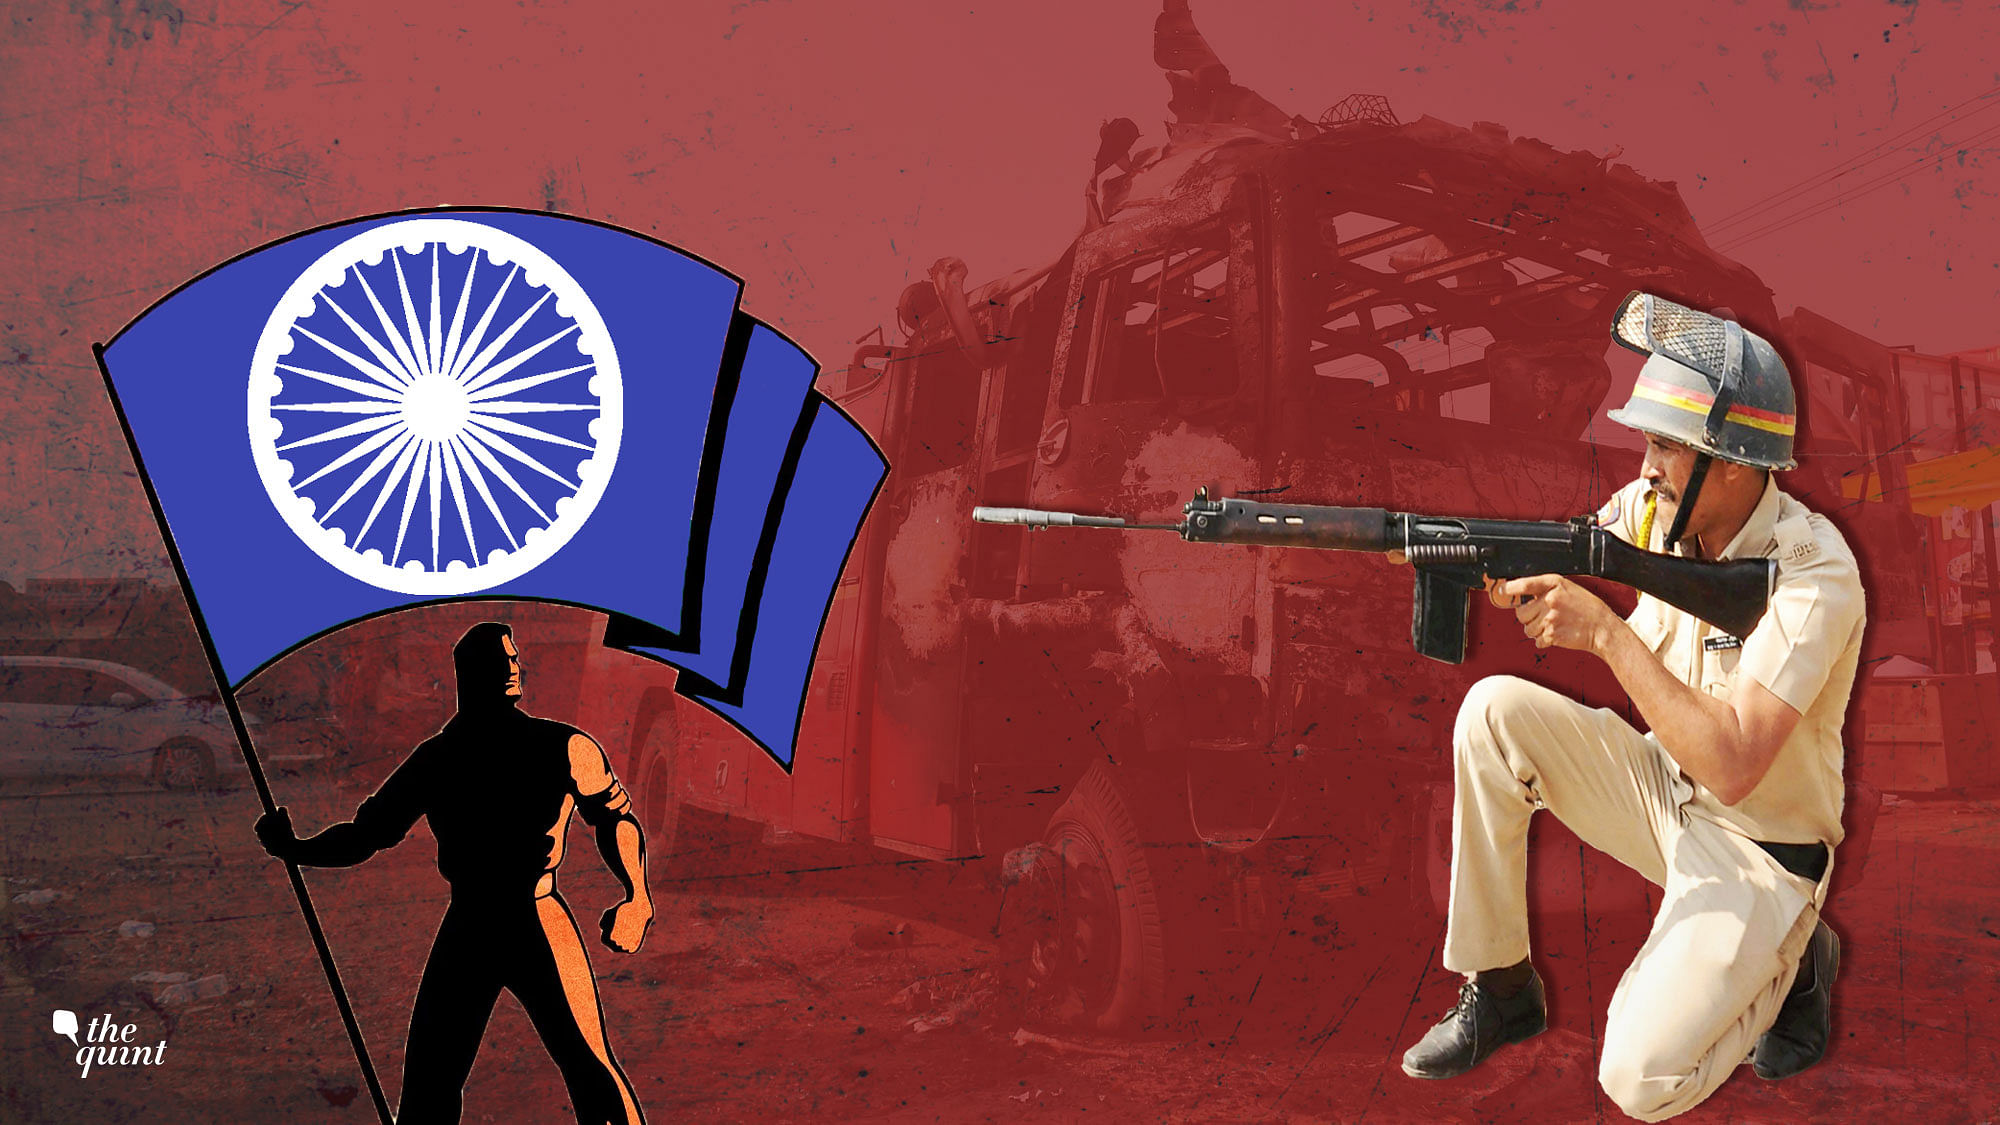 Image of the Bhima Army’s flag against a backdrop of 1 January’s caste violence in Maharashtra, used for representational purposes.